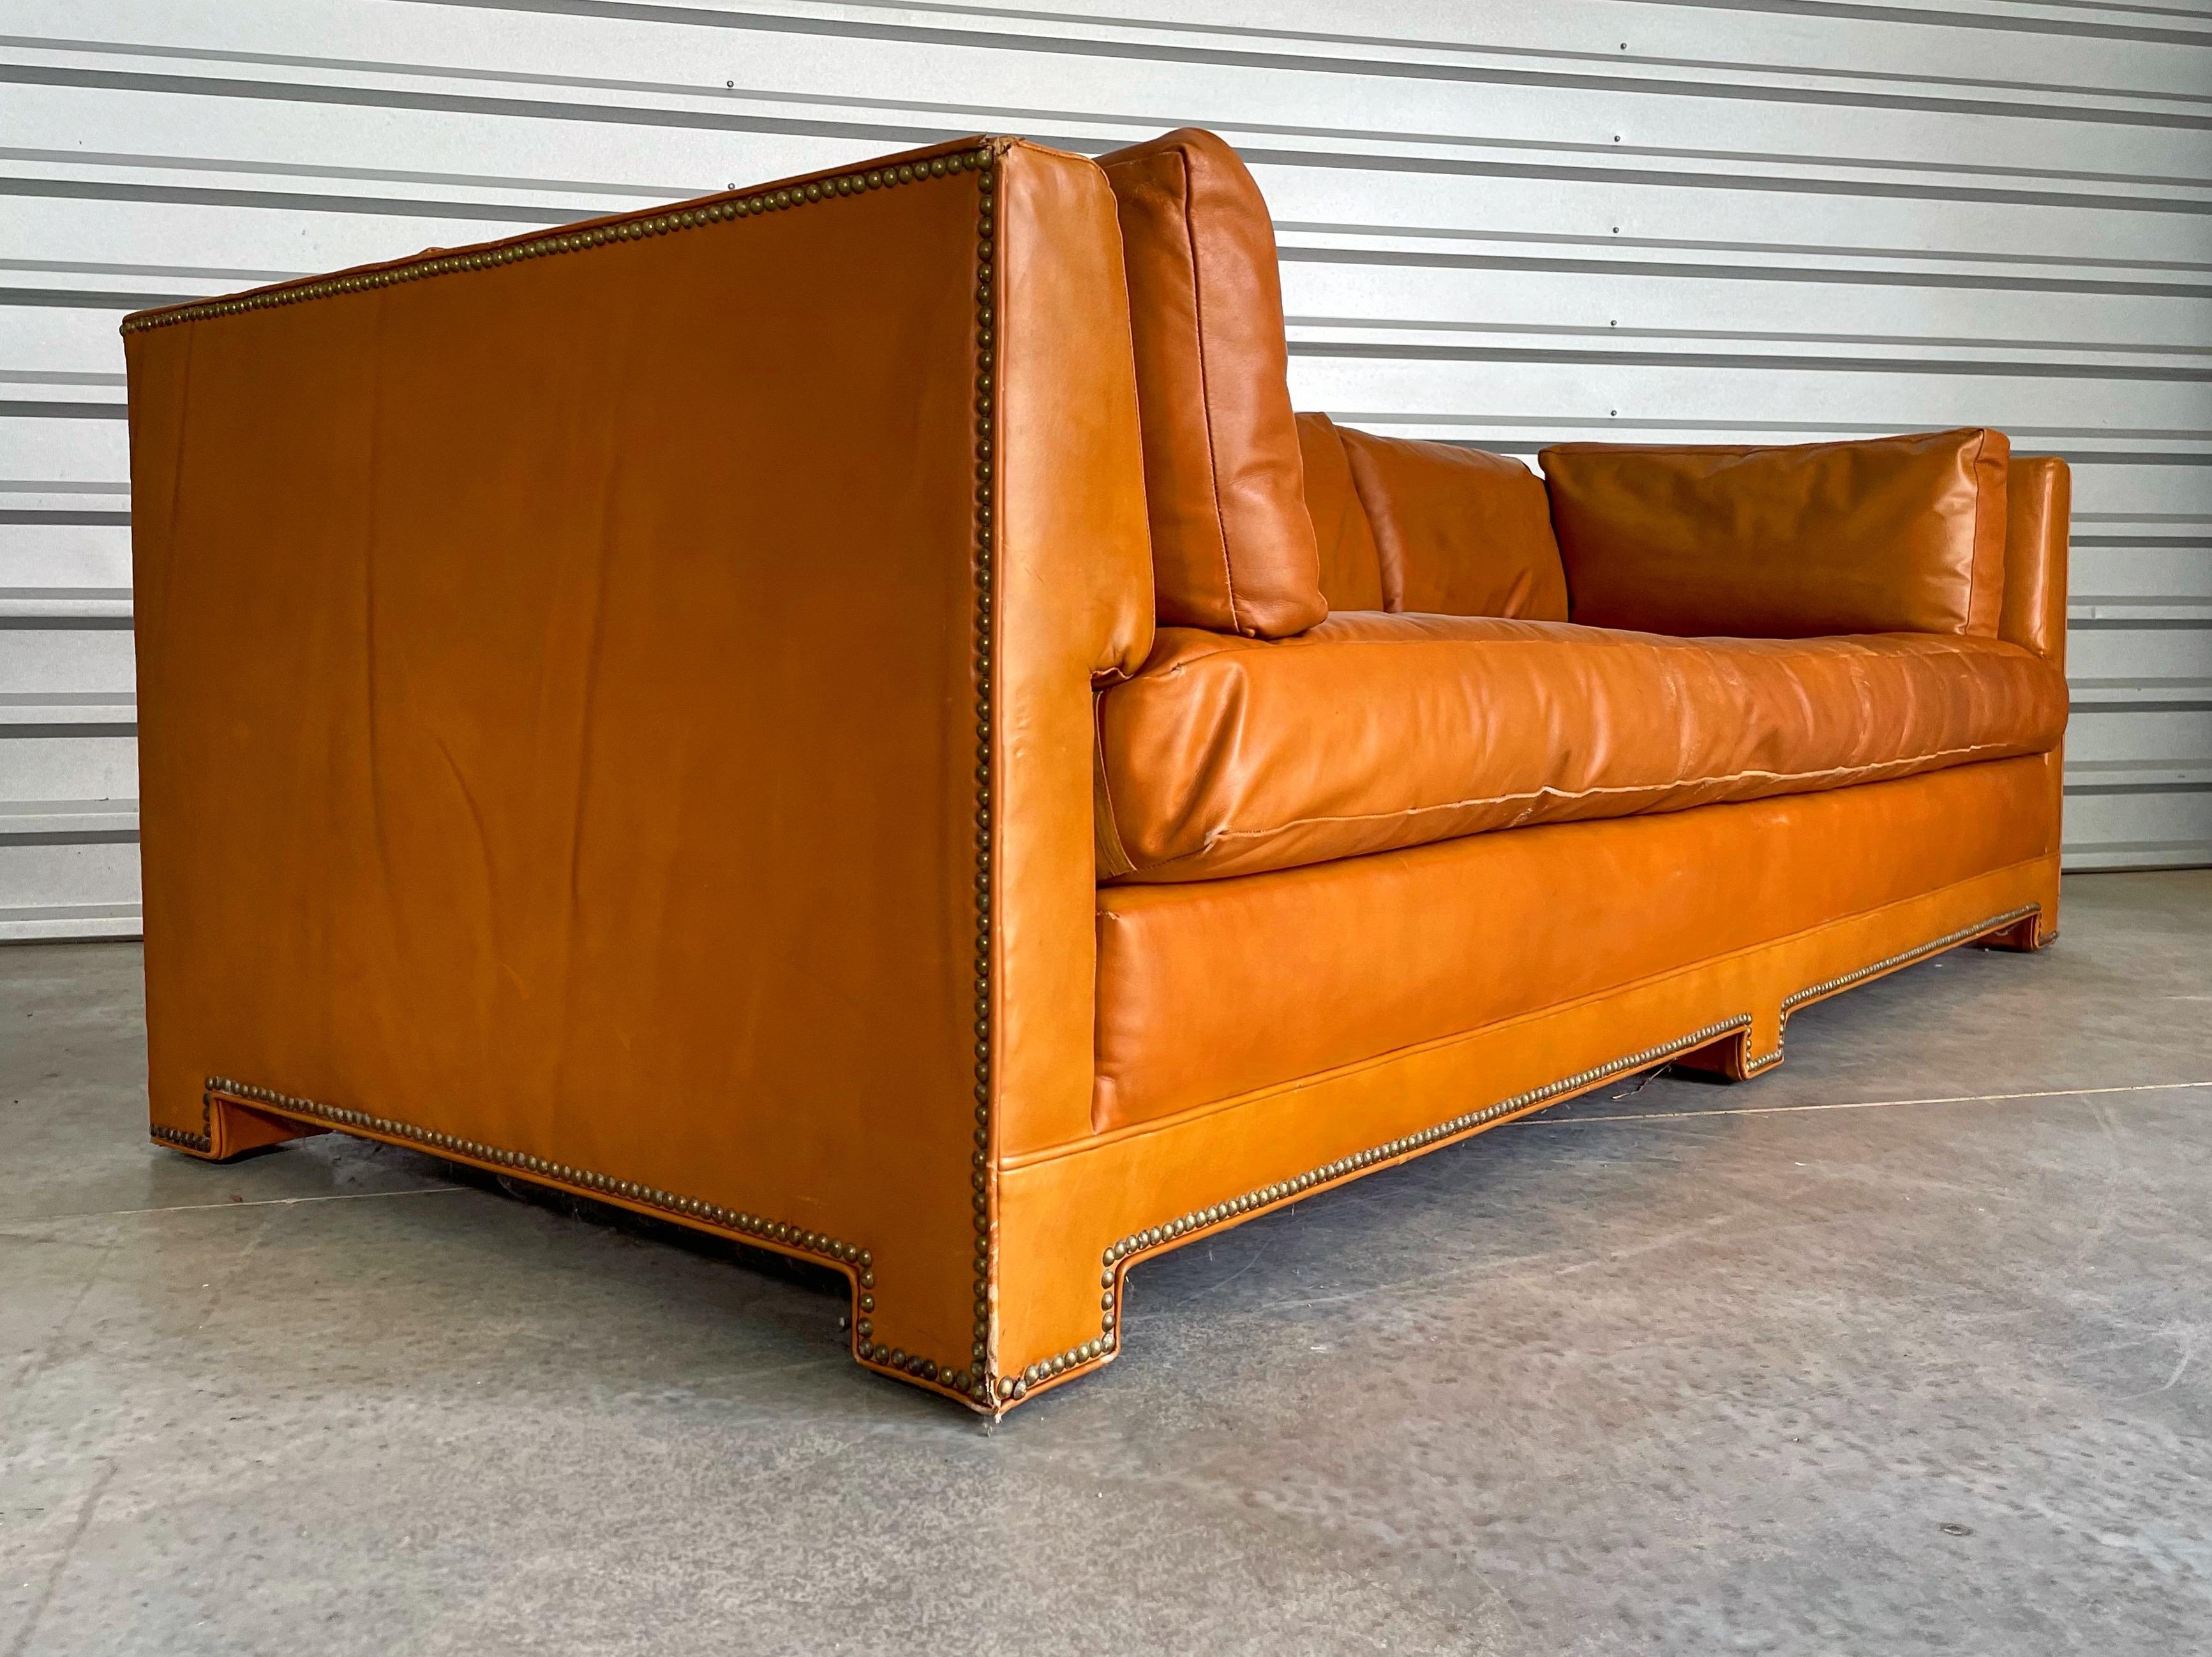 North American Midcentury Parsons Sofa by John Widdicomb in Original Cognac Leather and Down